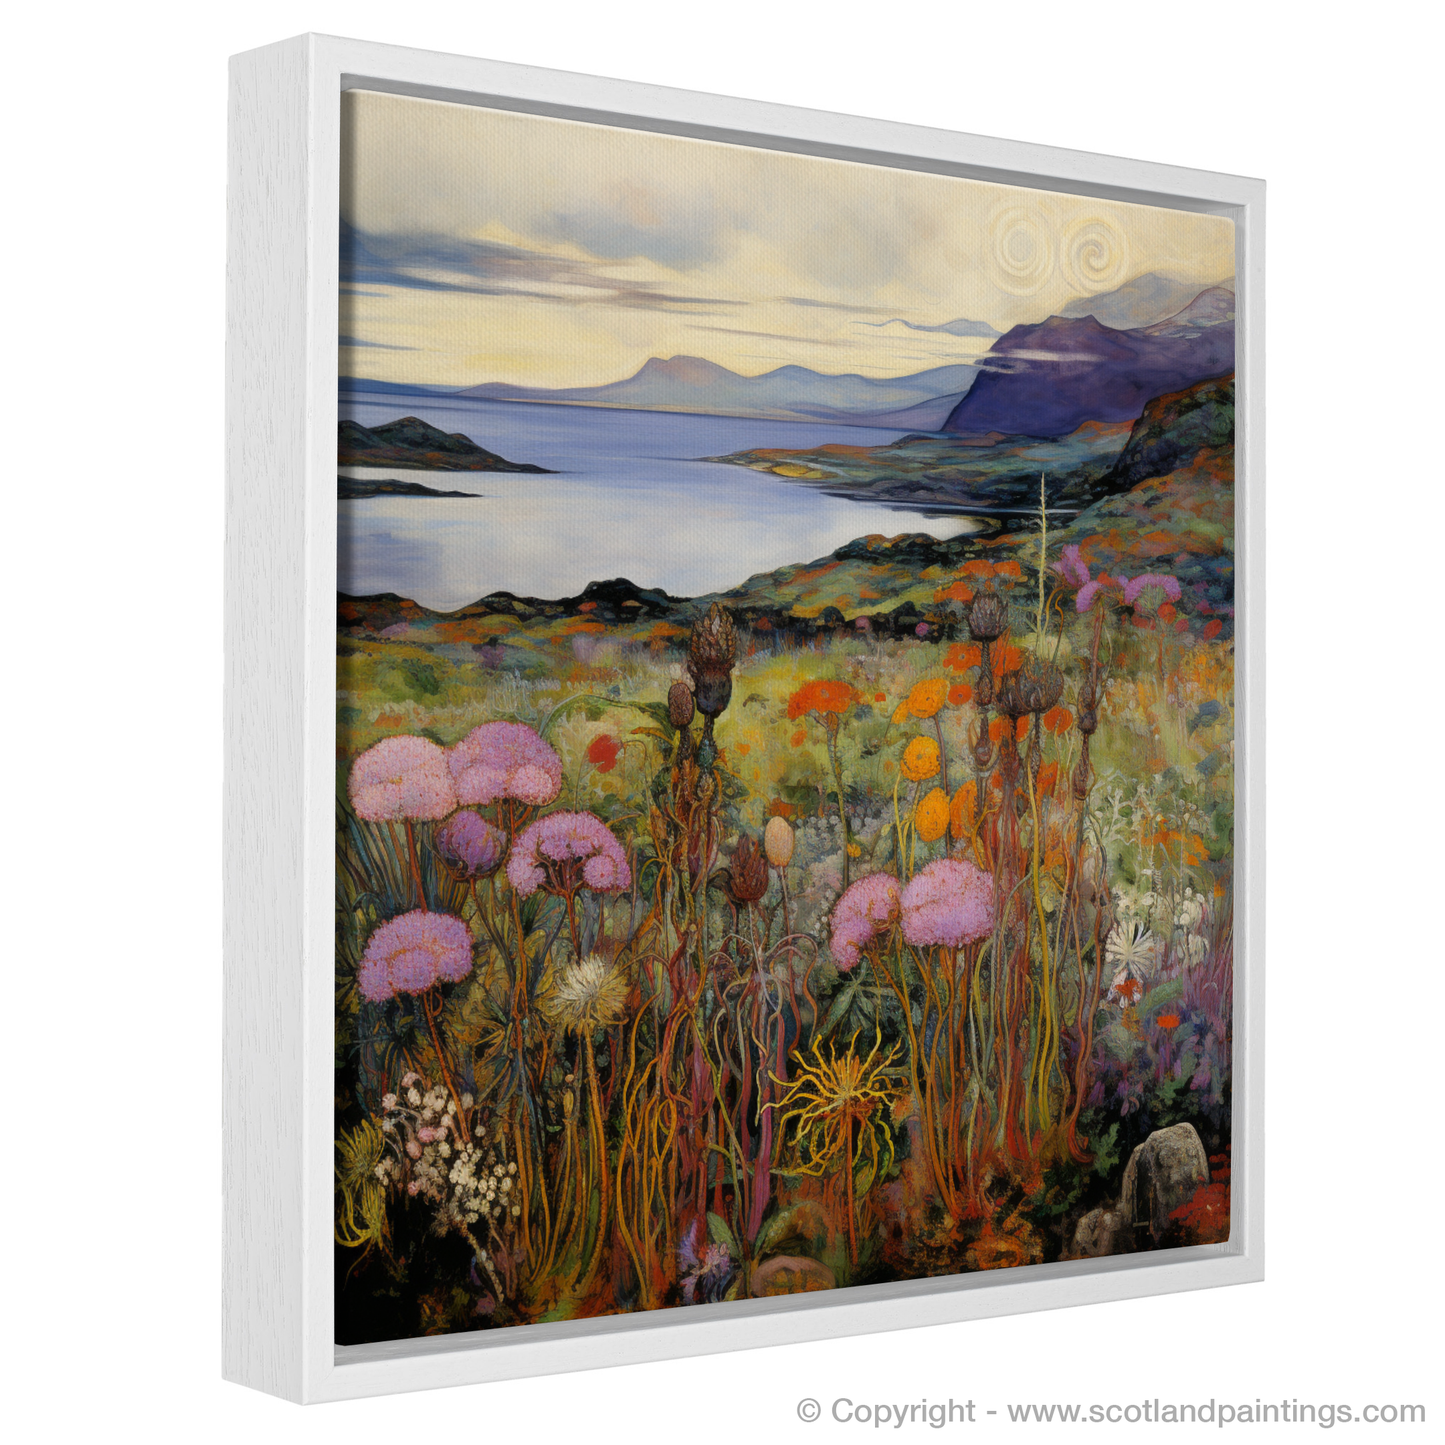 Enchanted Moorlands of Skye: A Symphony of Scottish Wildflowers